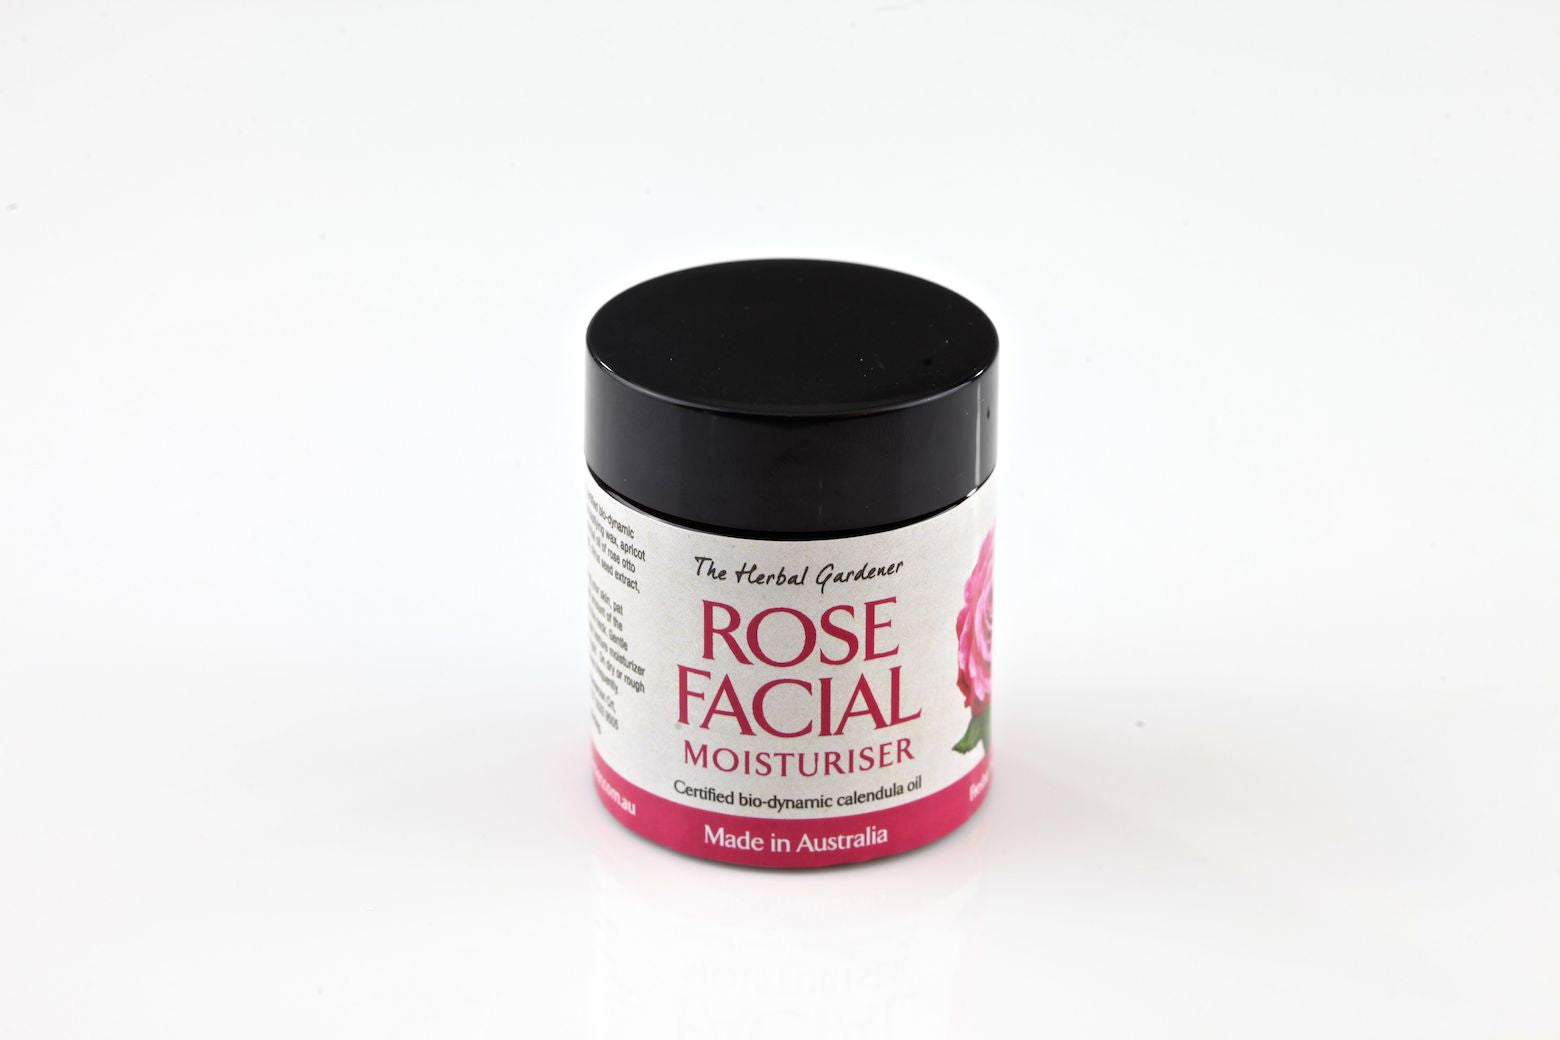 Paraben free rose moisturising skin cream for your face. Our facial moisturizer treatment helps smooth fine lines and reduce the signs of ageing. Our skin care products are suitable for sensitive skin. Grown and made on the Gold Coast, QLD Australia.